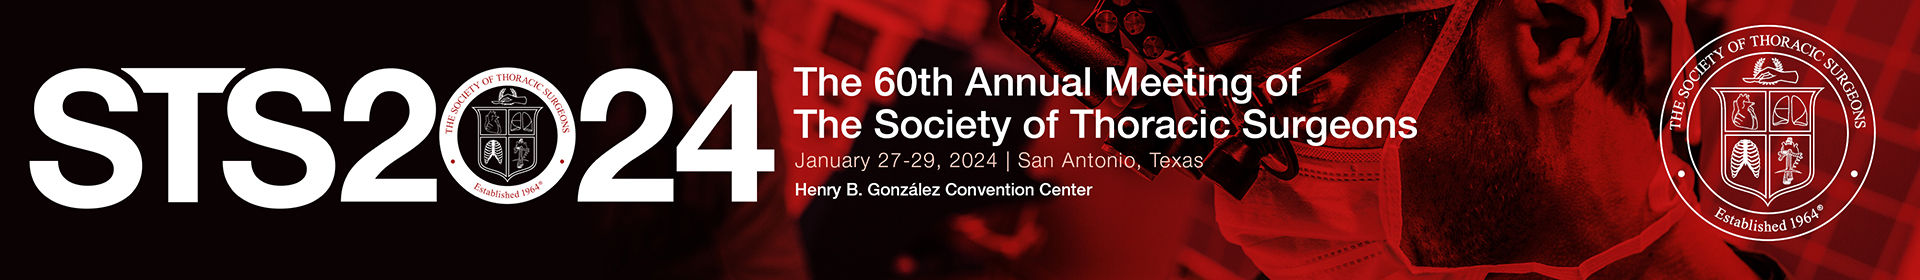 STS 2024 Annual Meeting Event Banner